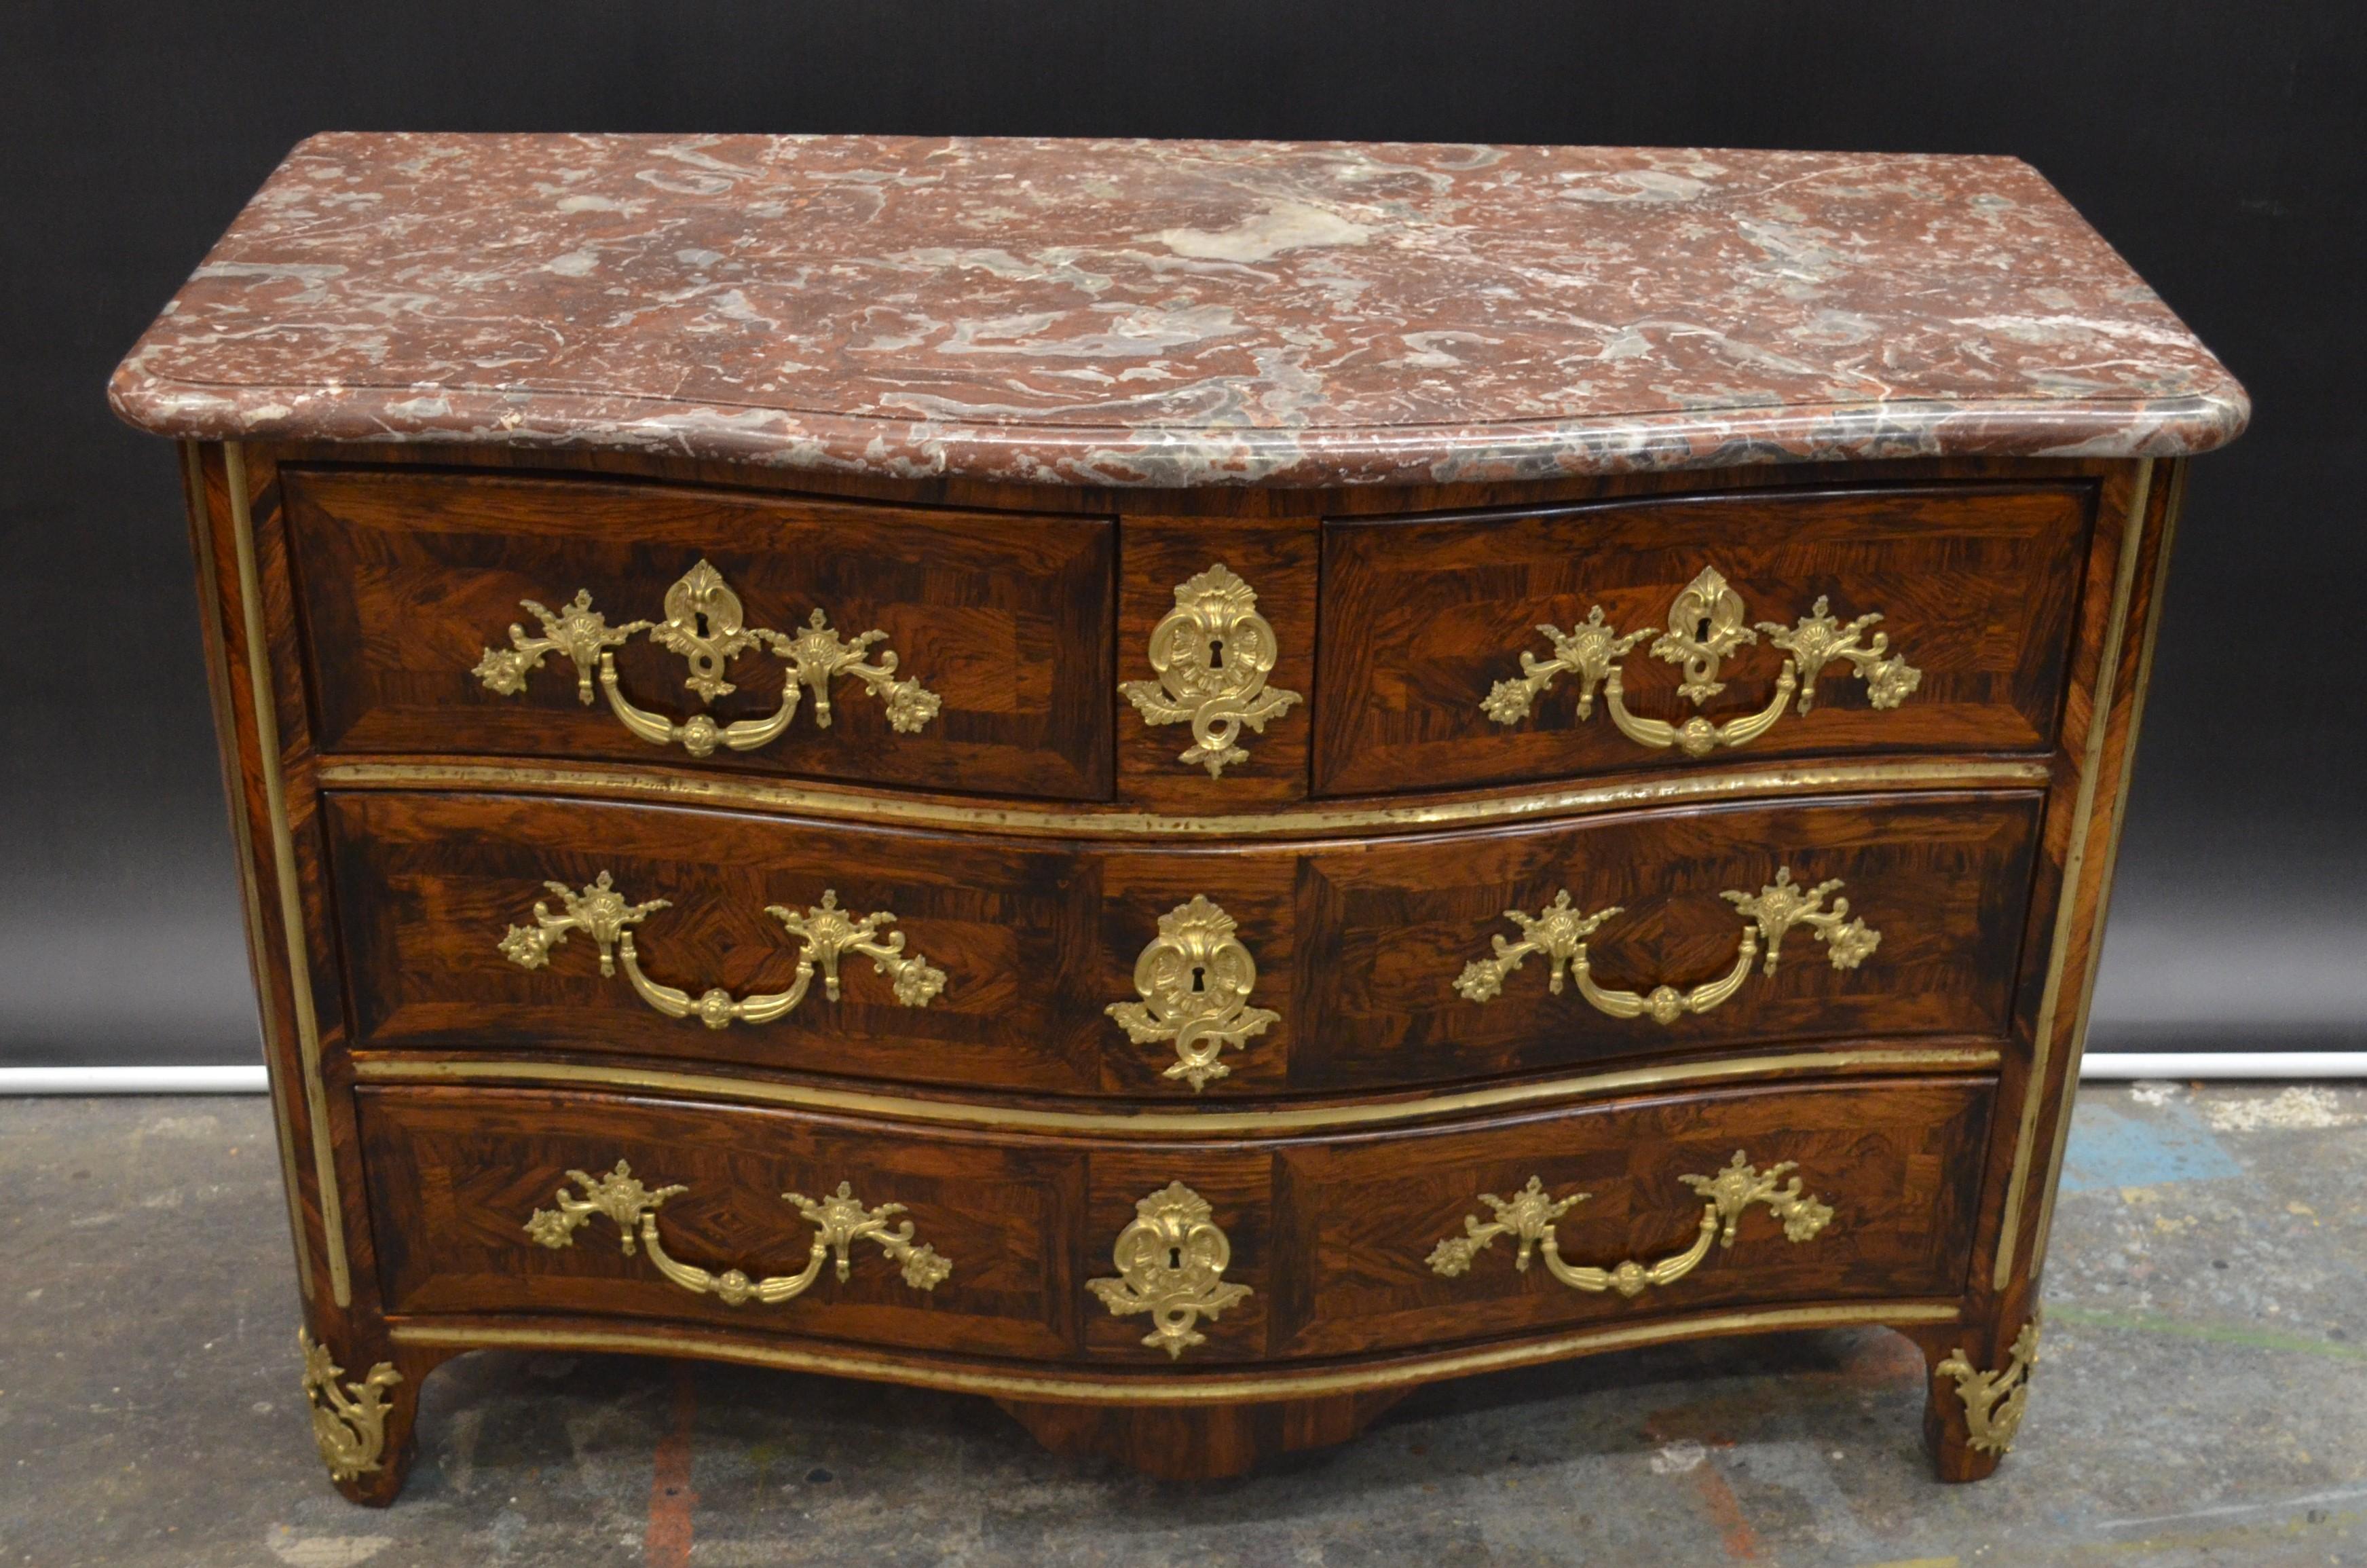 French Régence Ormolu-Mounted Rosewood & Kingwood Inlay Rouge Marble Top Commode For Sale 1